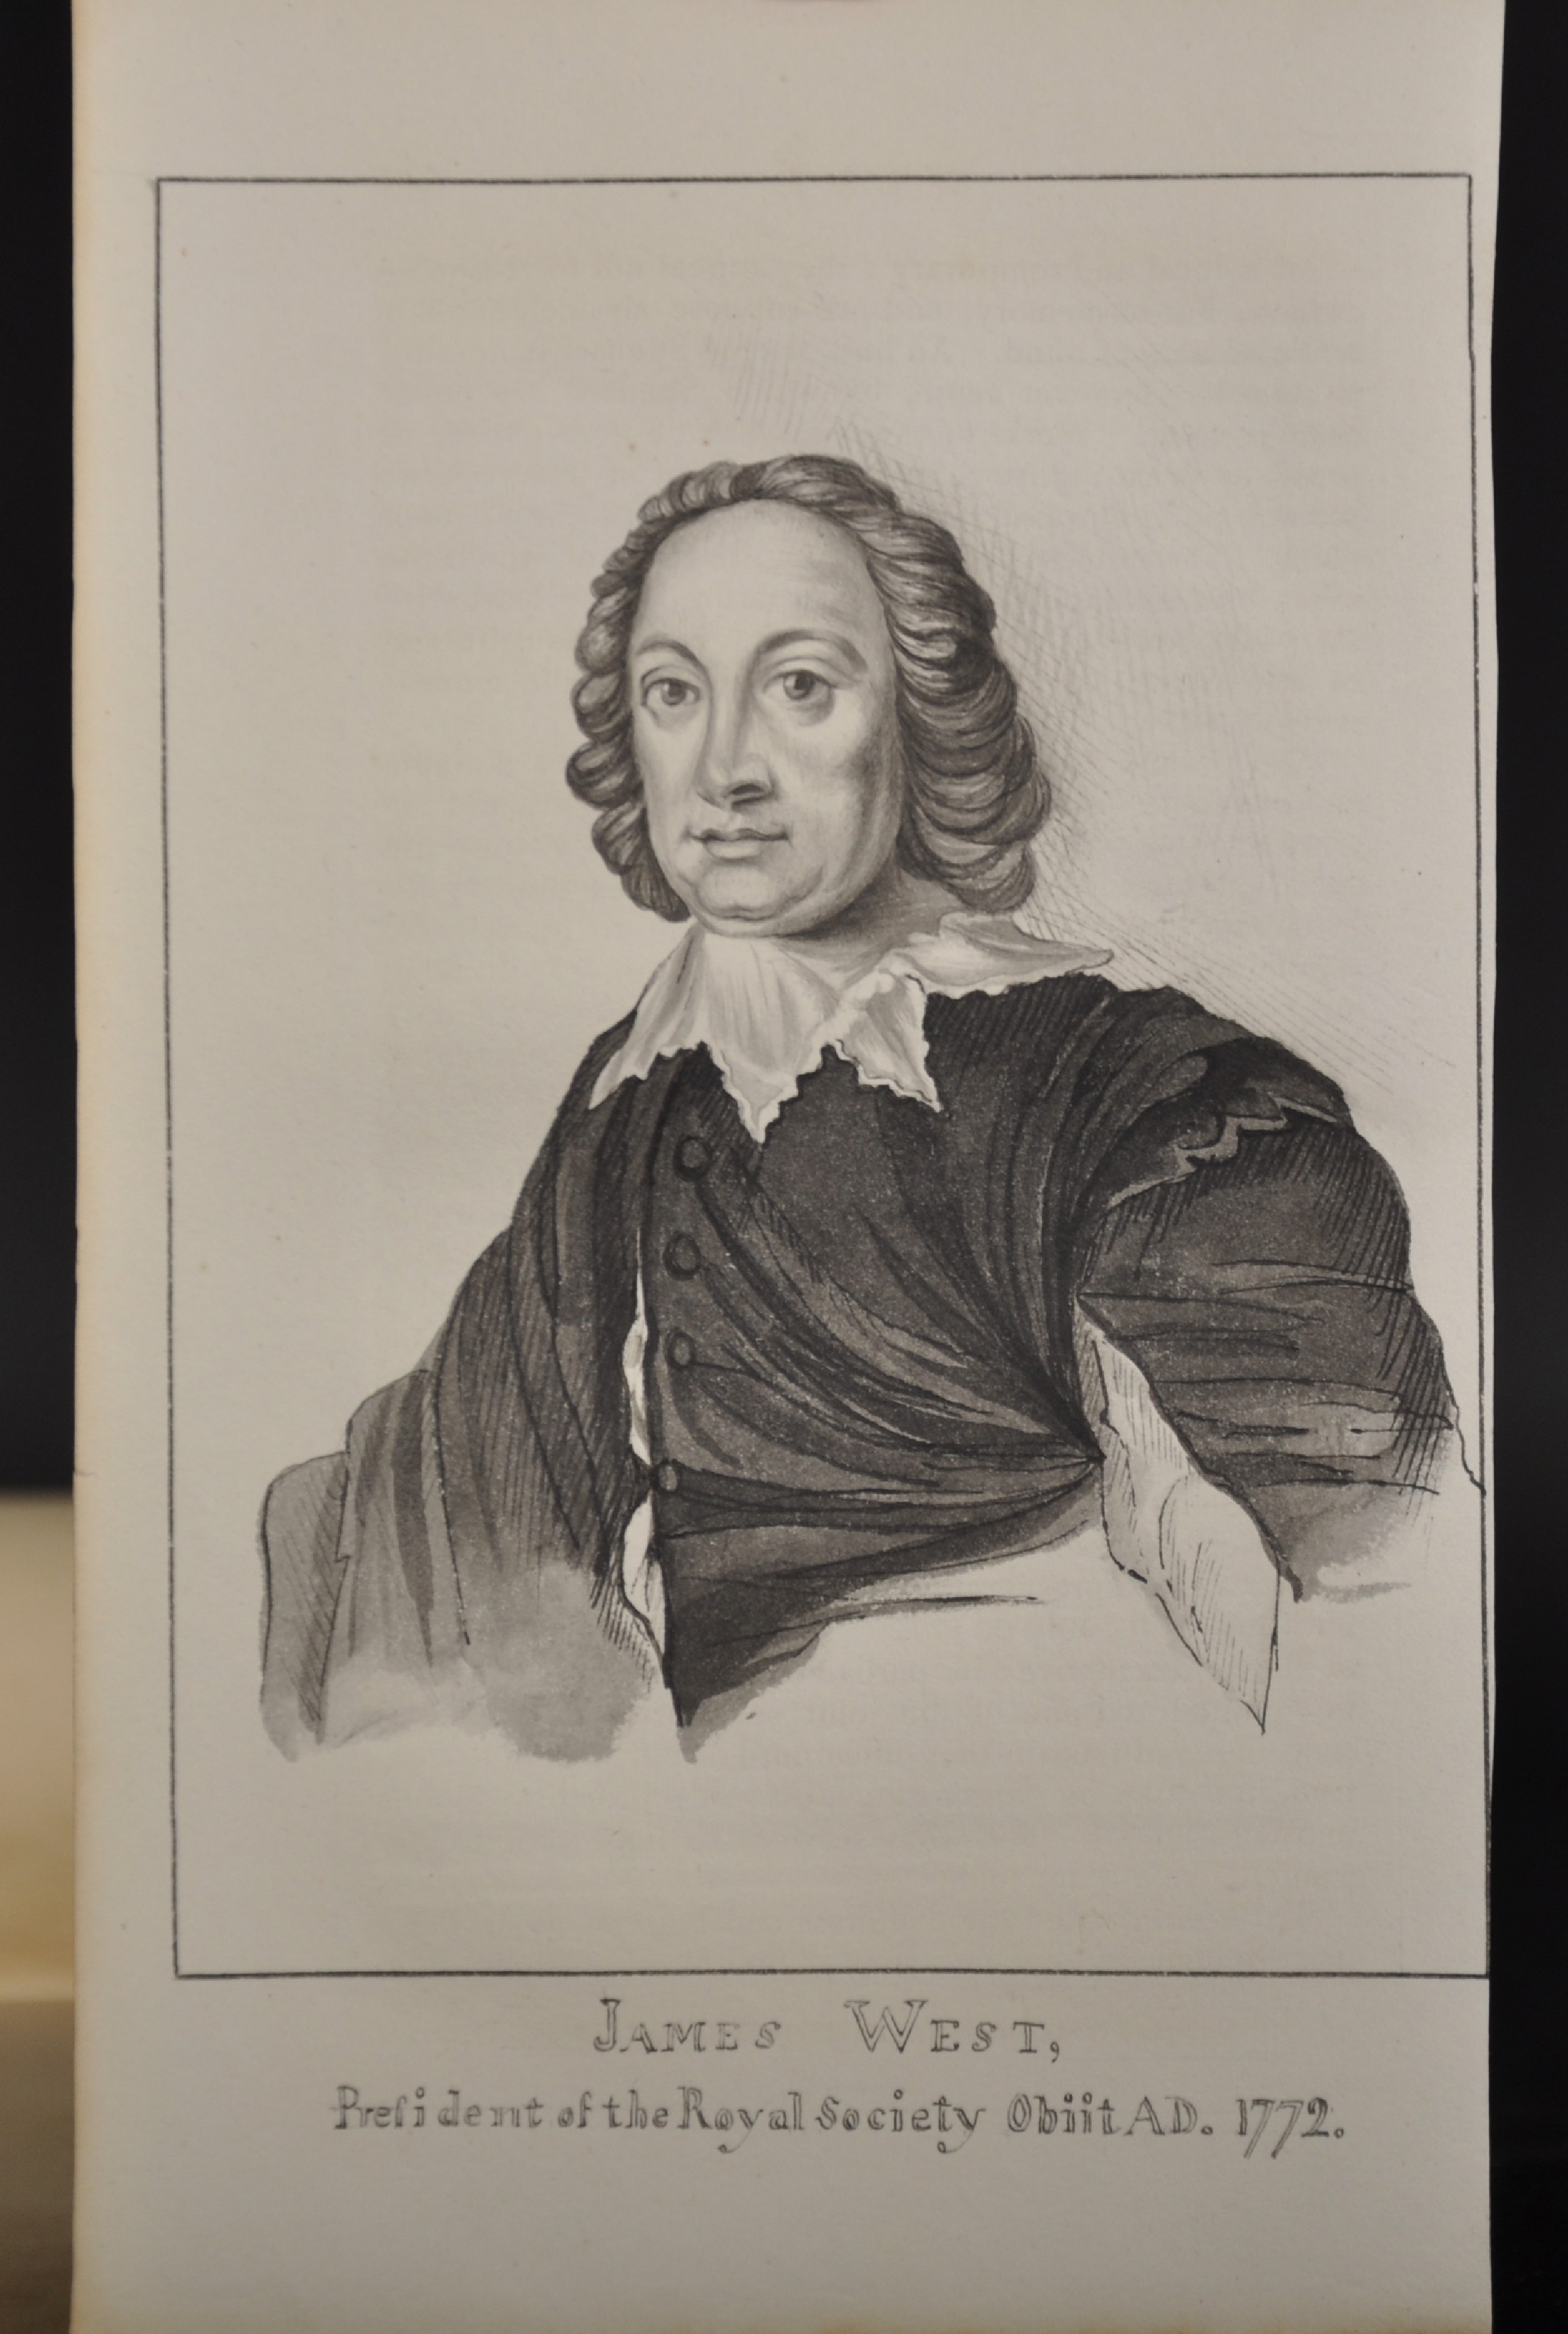 18th Century English School. Portrait of James West, President of the Royal Society, Obiit AD. - Image 2 of 4